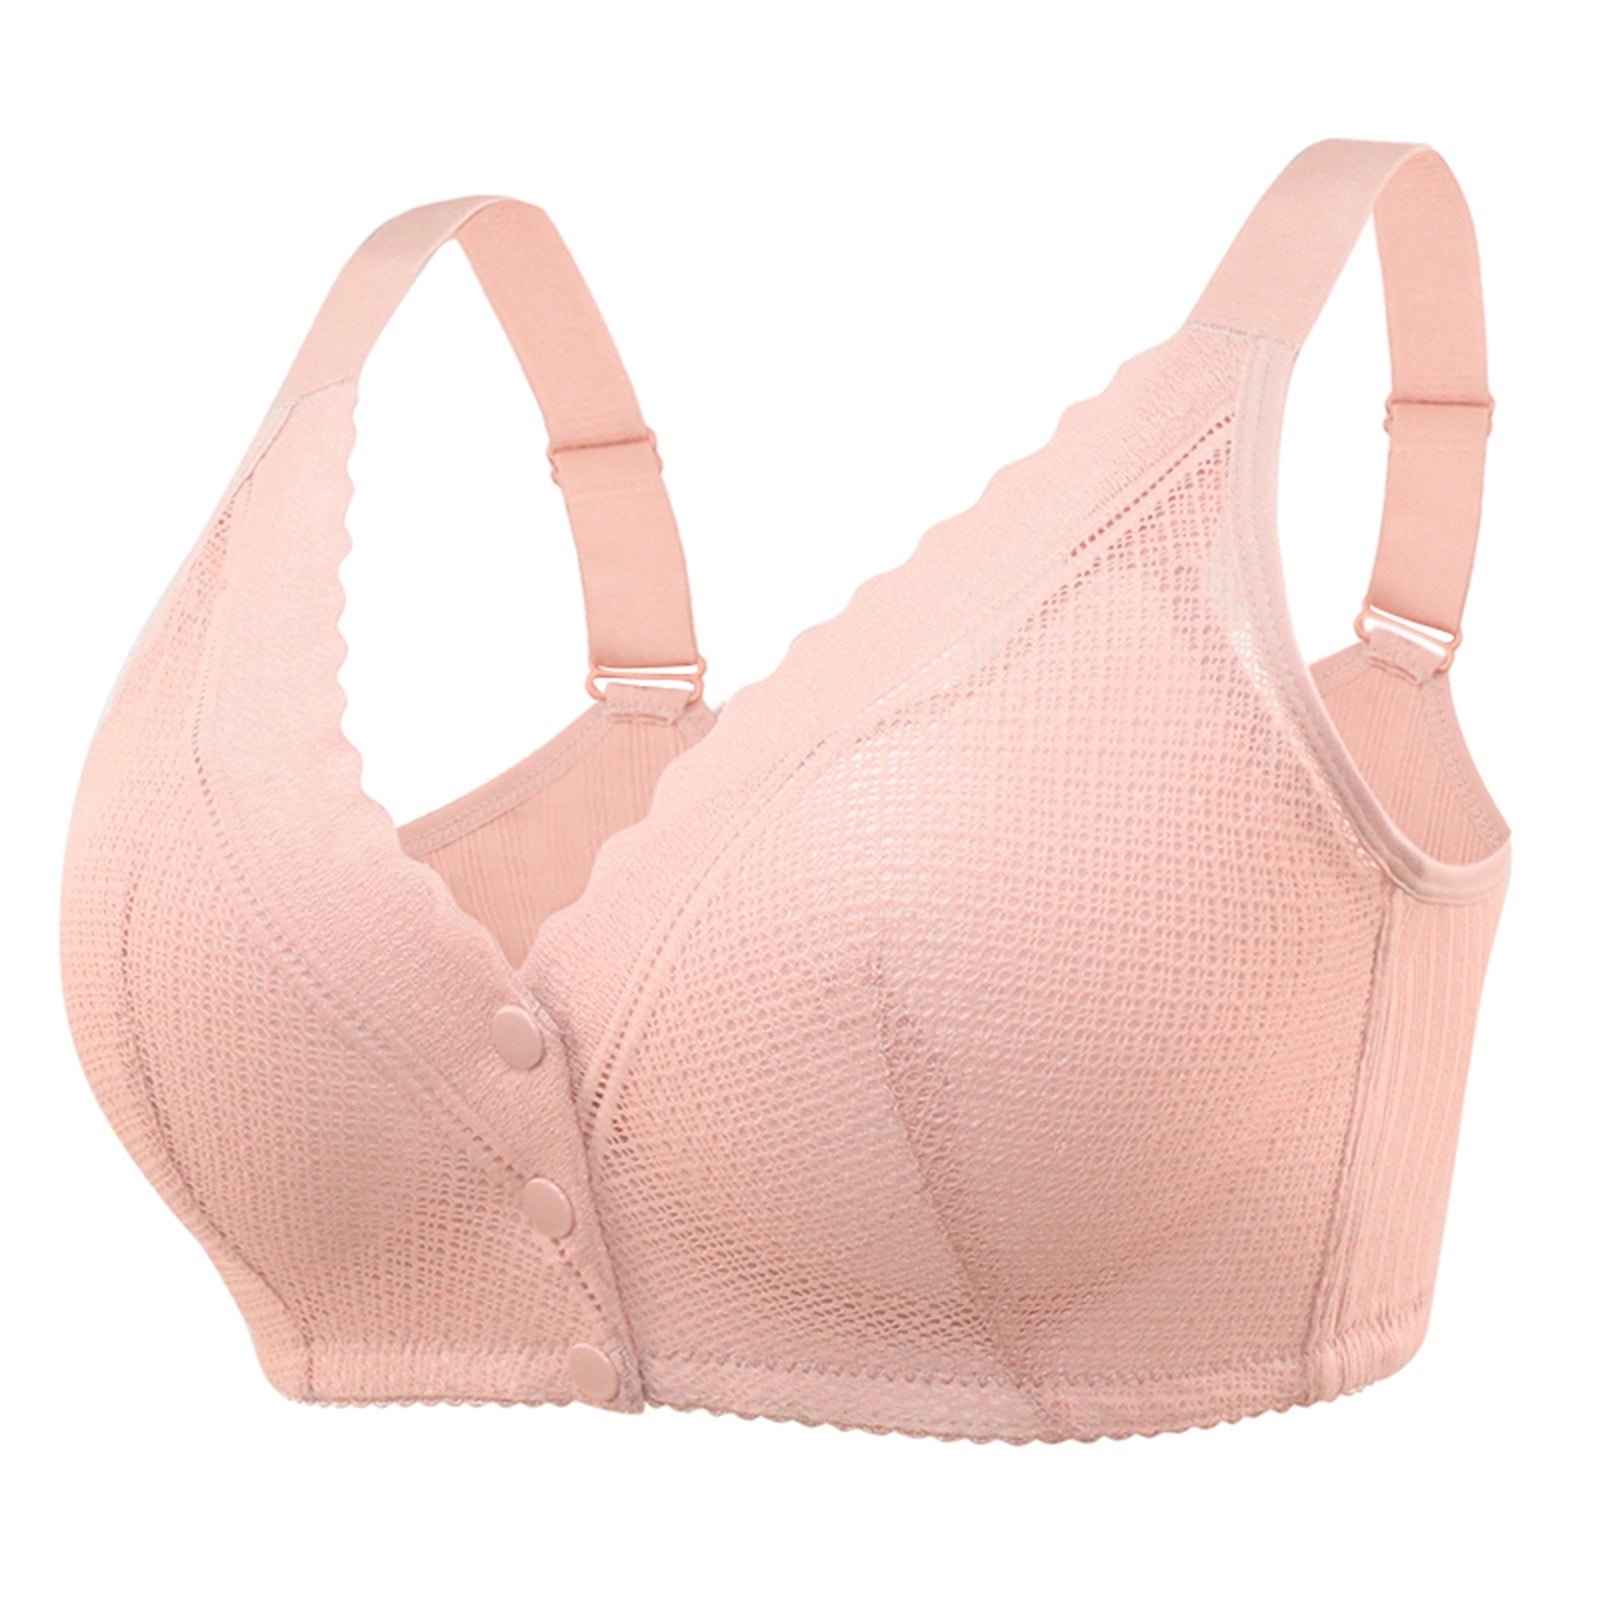 Zuwimk Bras For Women Push Up,Women's Full Cup Supportive Non